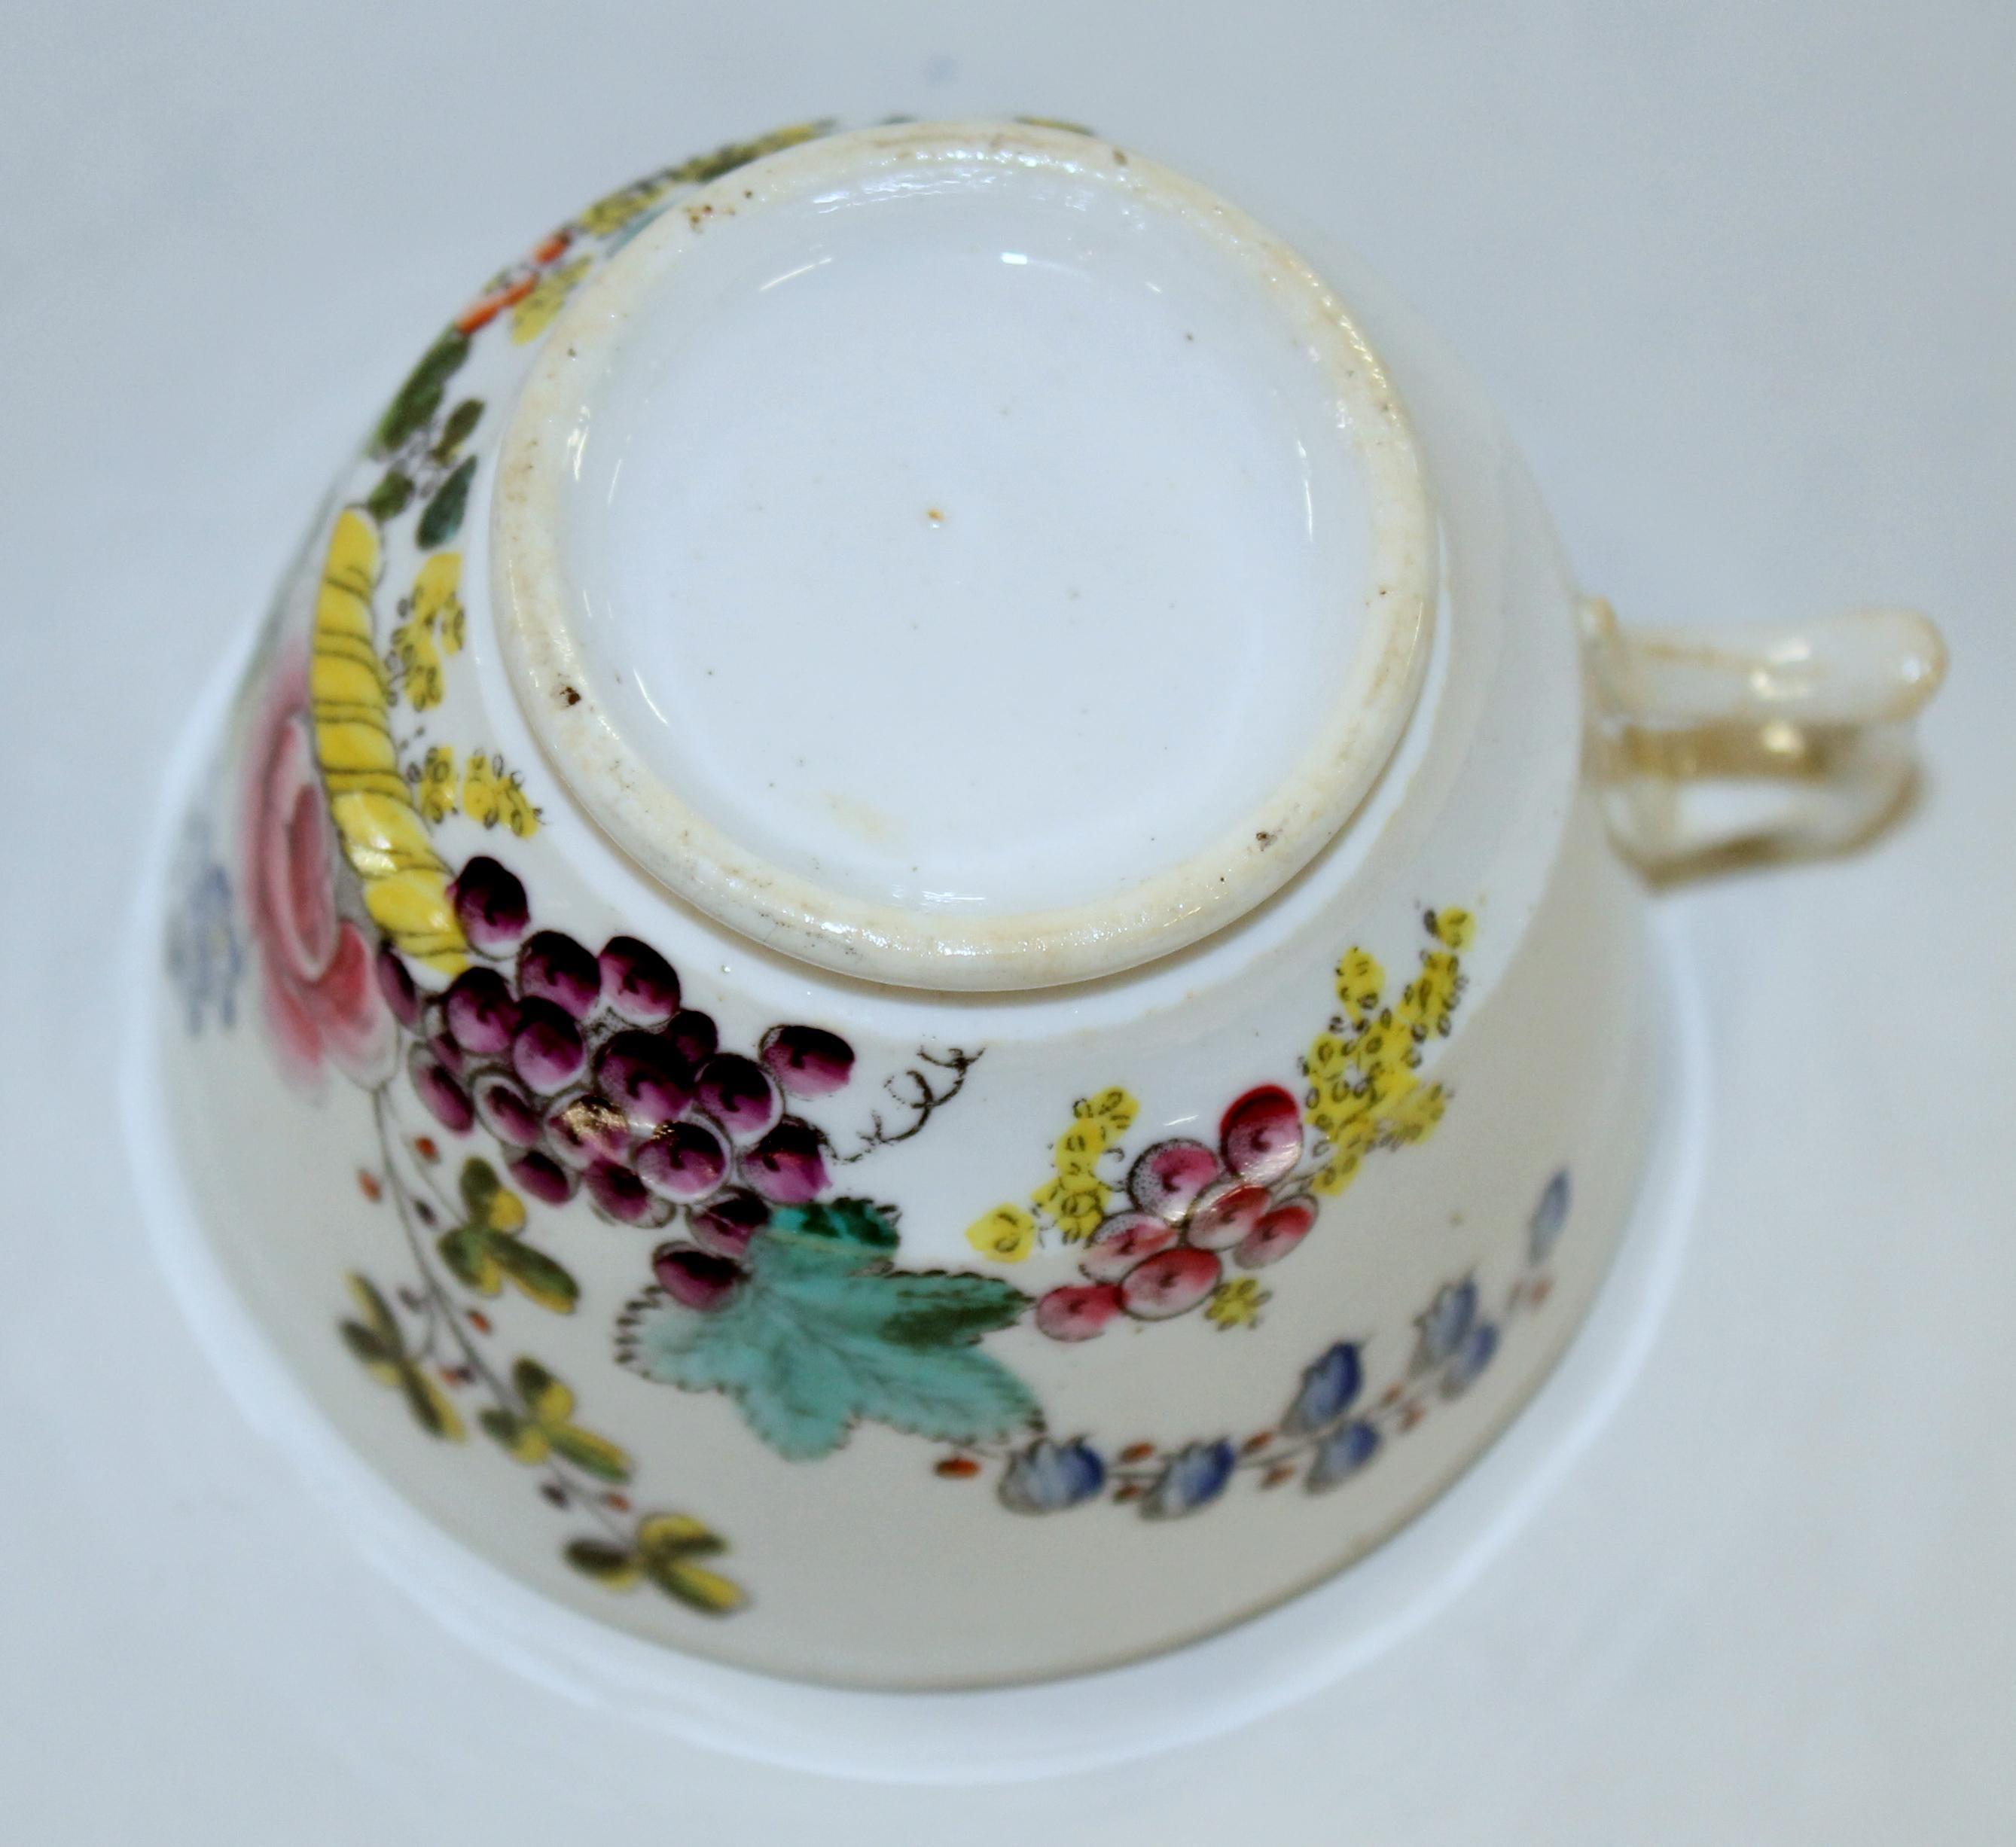 English Early 19th Century New Hall Porcelain Floral Decor Cup and Saucer For Sale 6